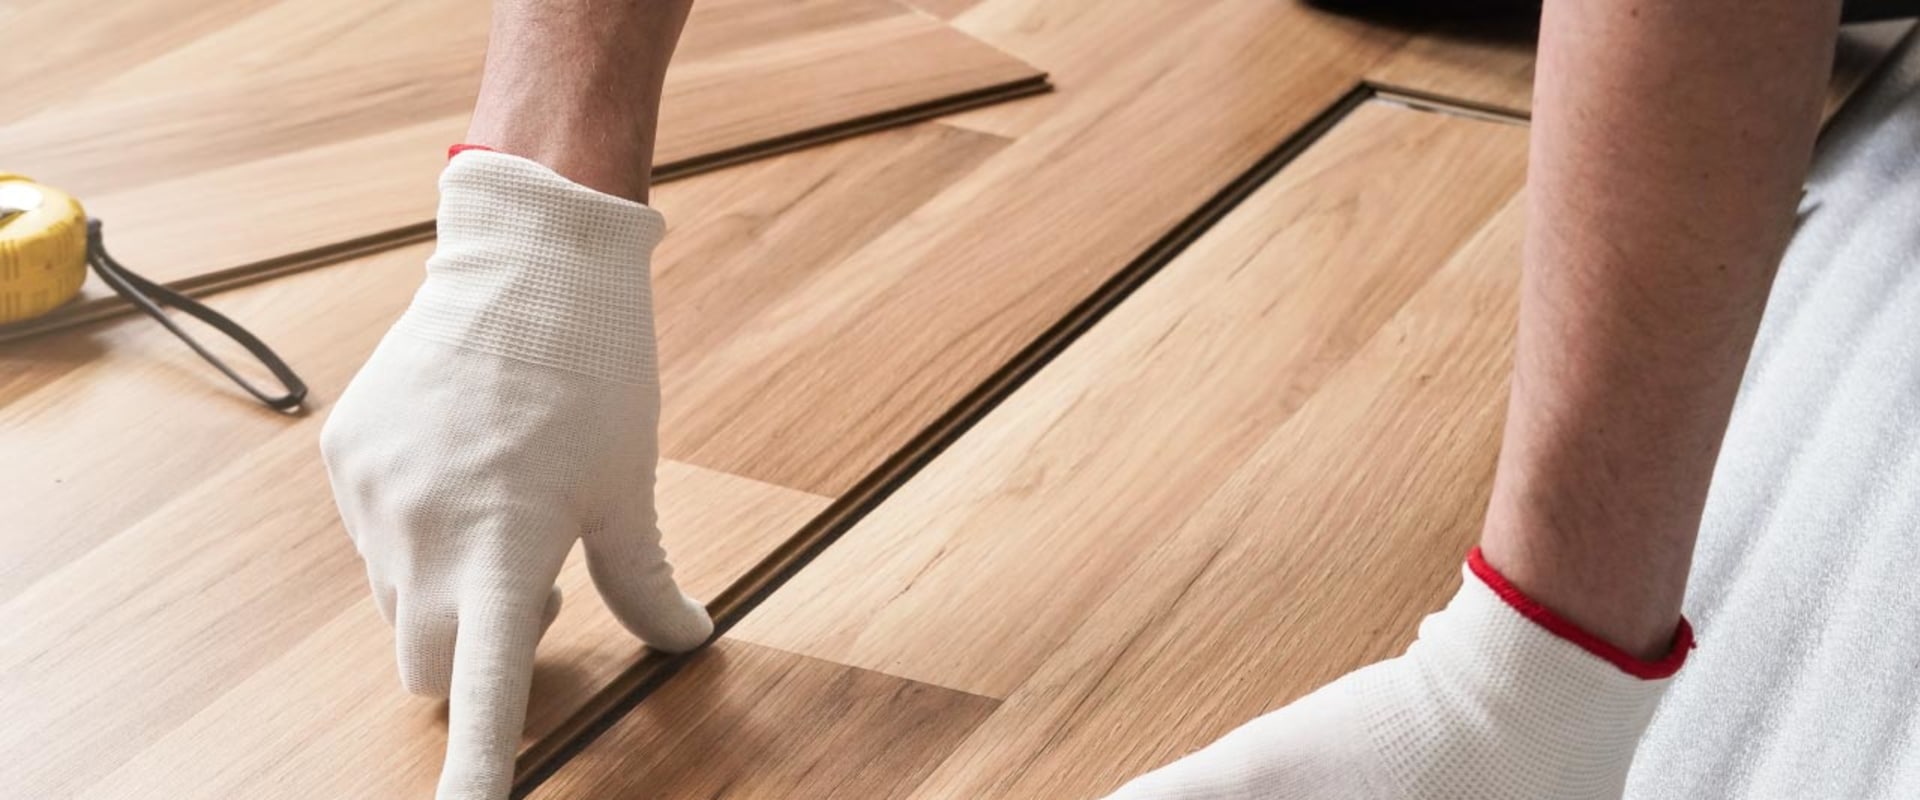 How much does ll flooring charge for installation?